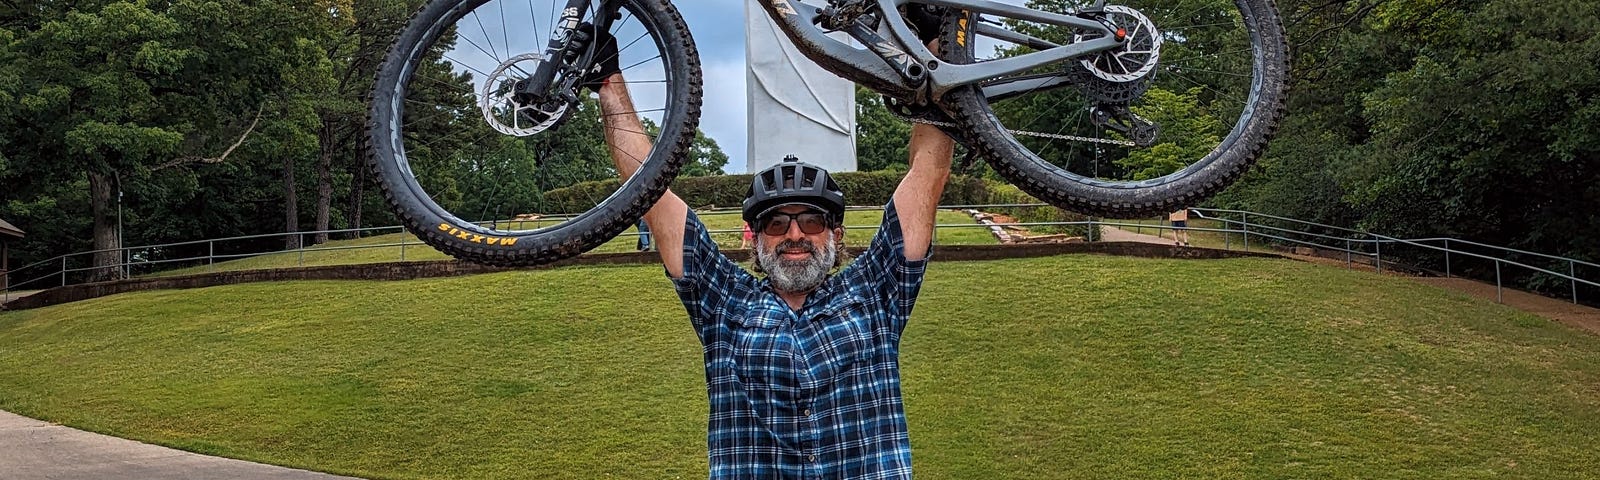 The author holding a mountain bike over his head, posed in front of the Christ of the Ozarks statue in Eureka Springs, Arkansas